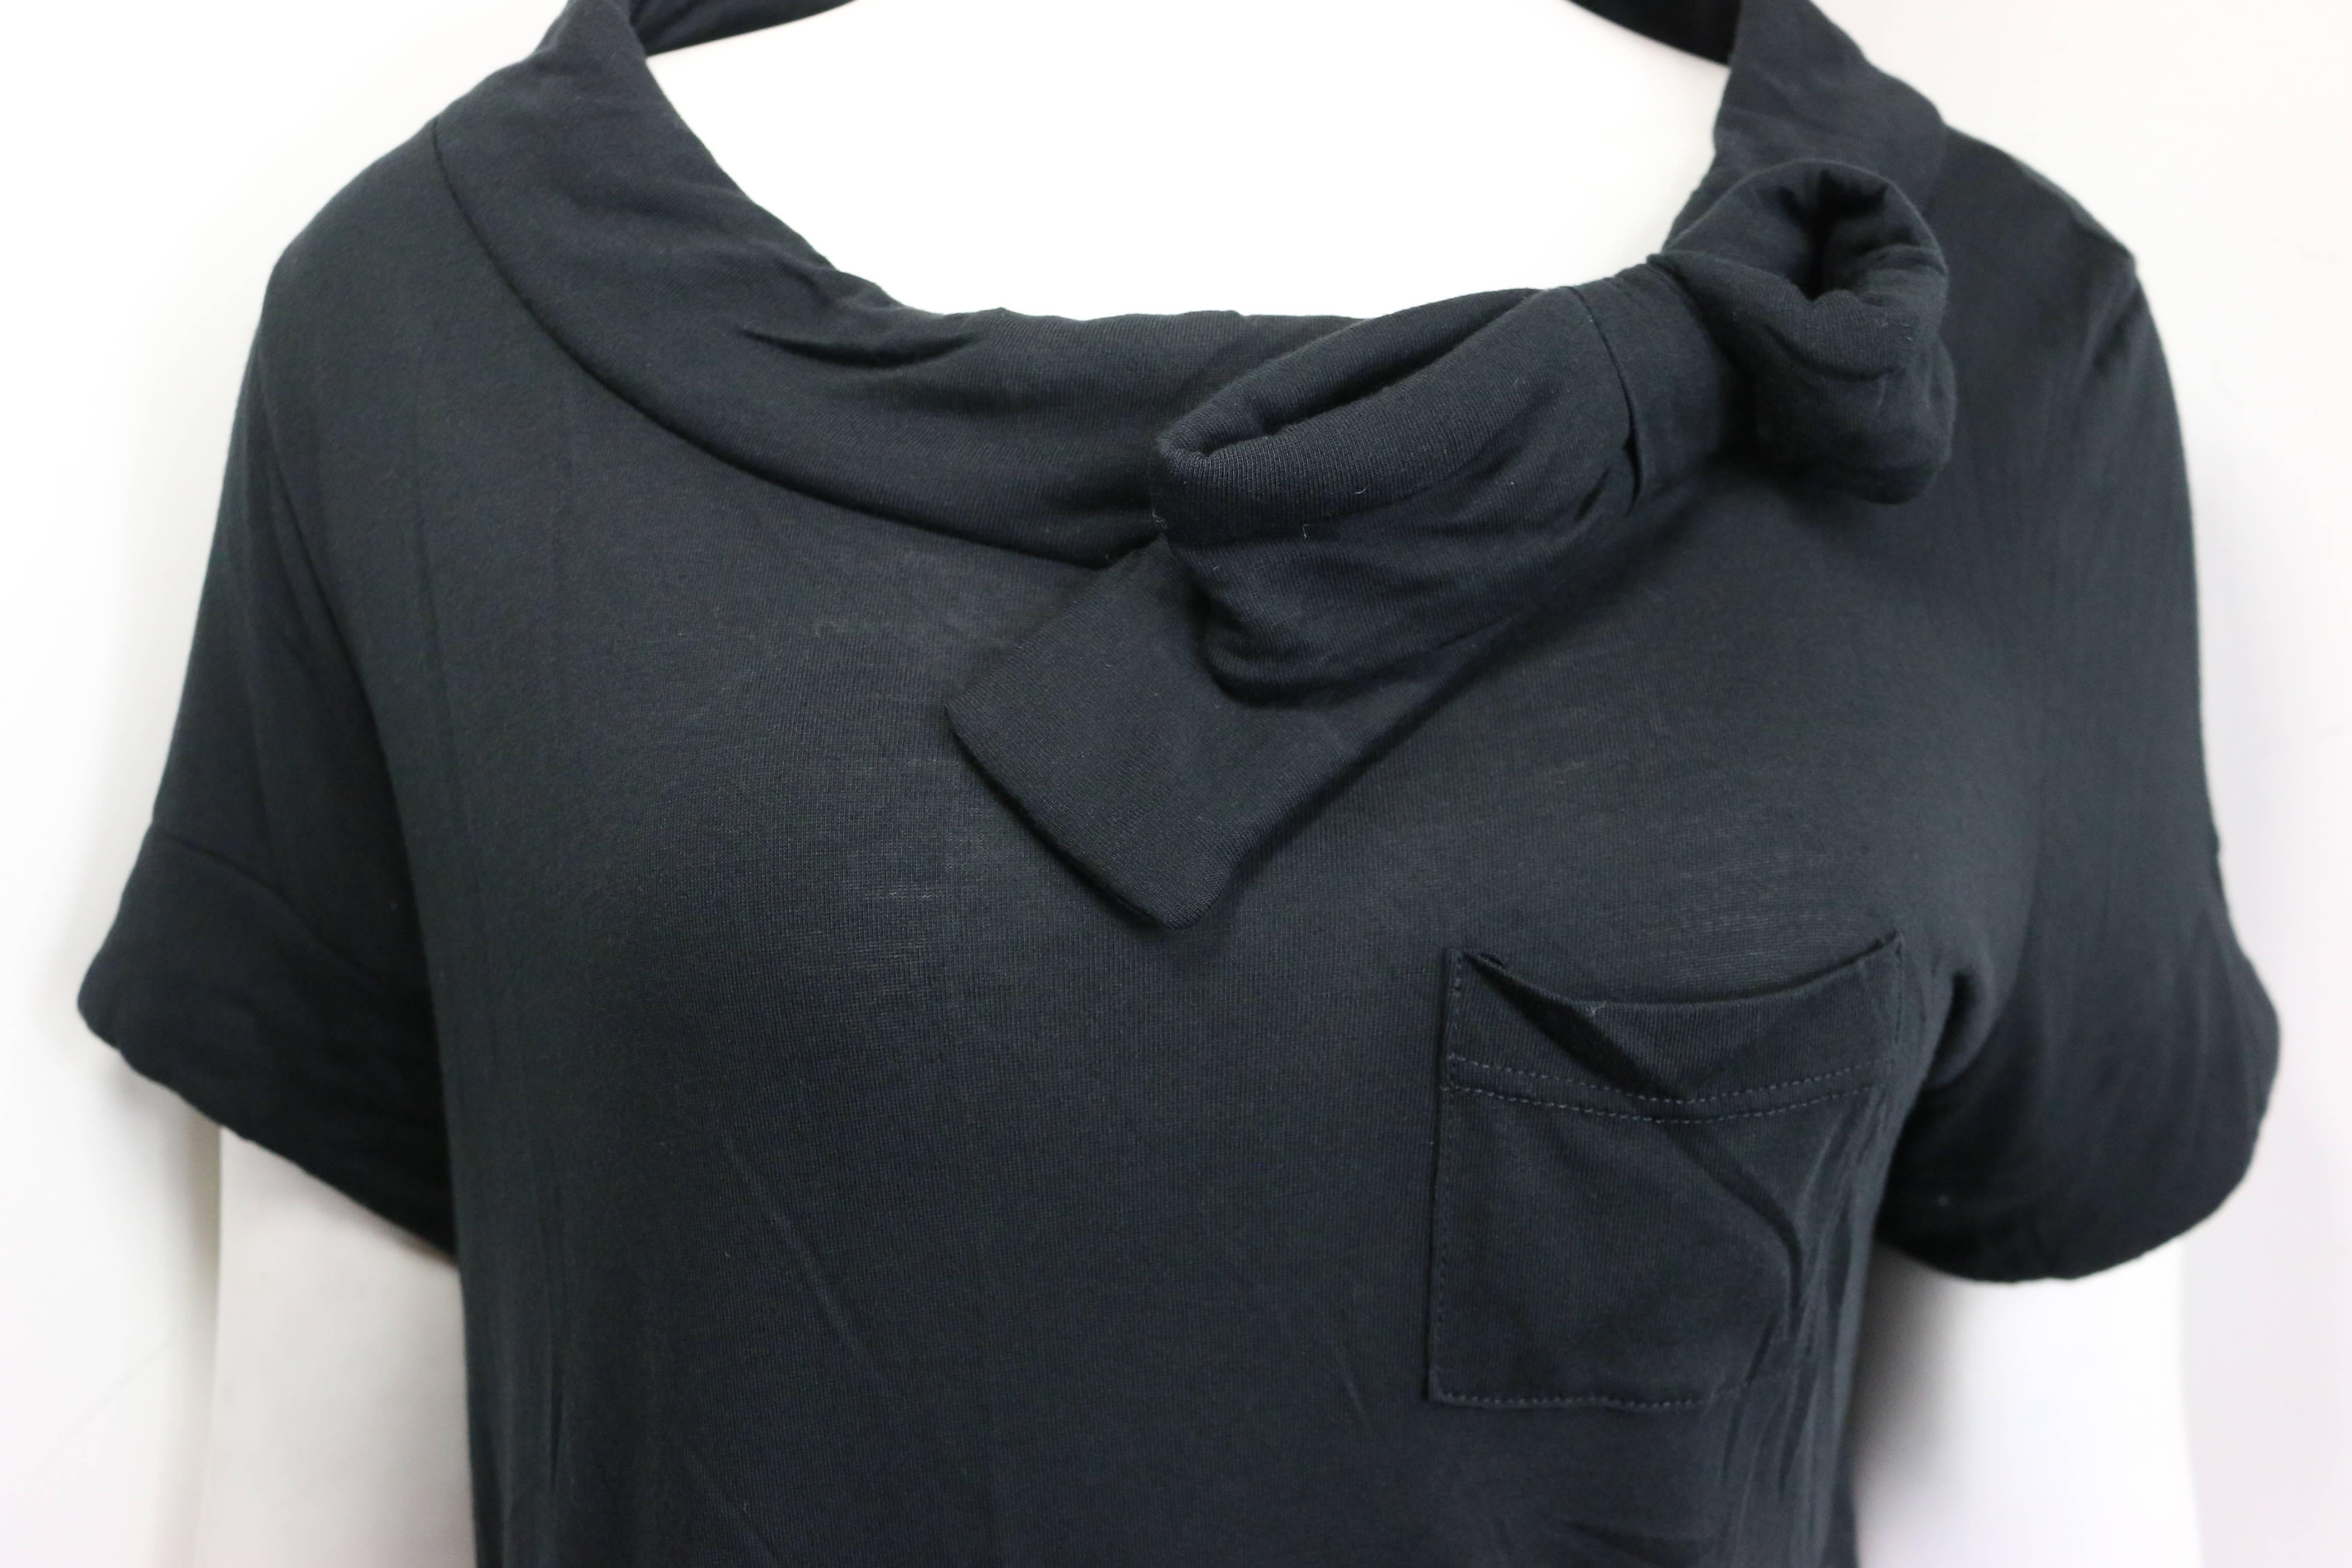 - Red Valentino black cotton with bow on the collar short sleeves scoop neck t shirt. Featuring a small pocket in front. It comes with original tag that has never been worn before. 

- Made in Italy. 

- Size XL. 

- 100% Modal. 